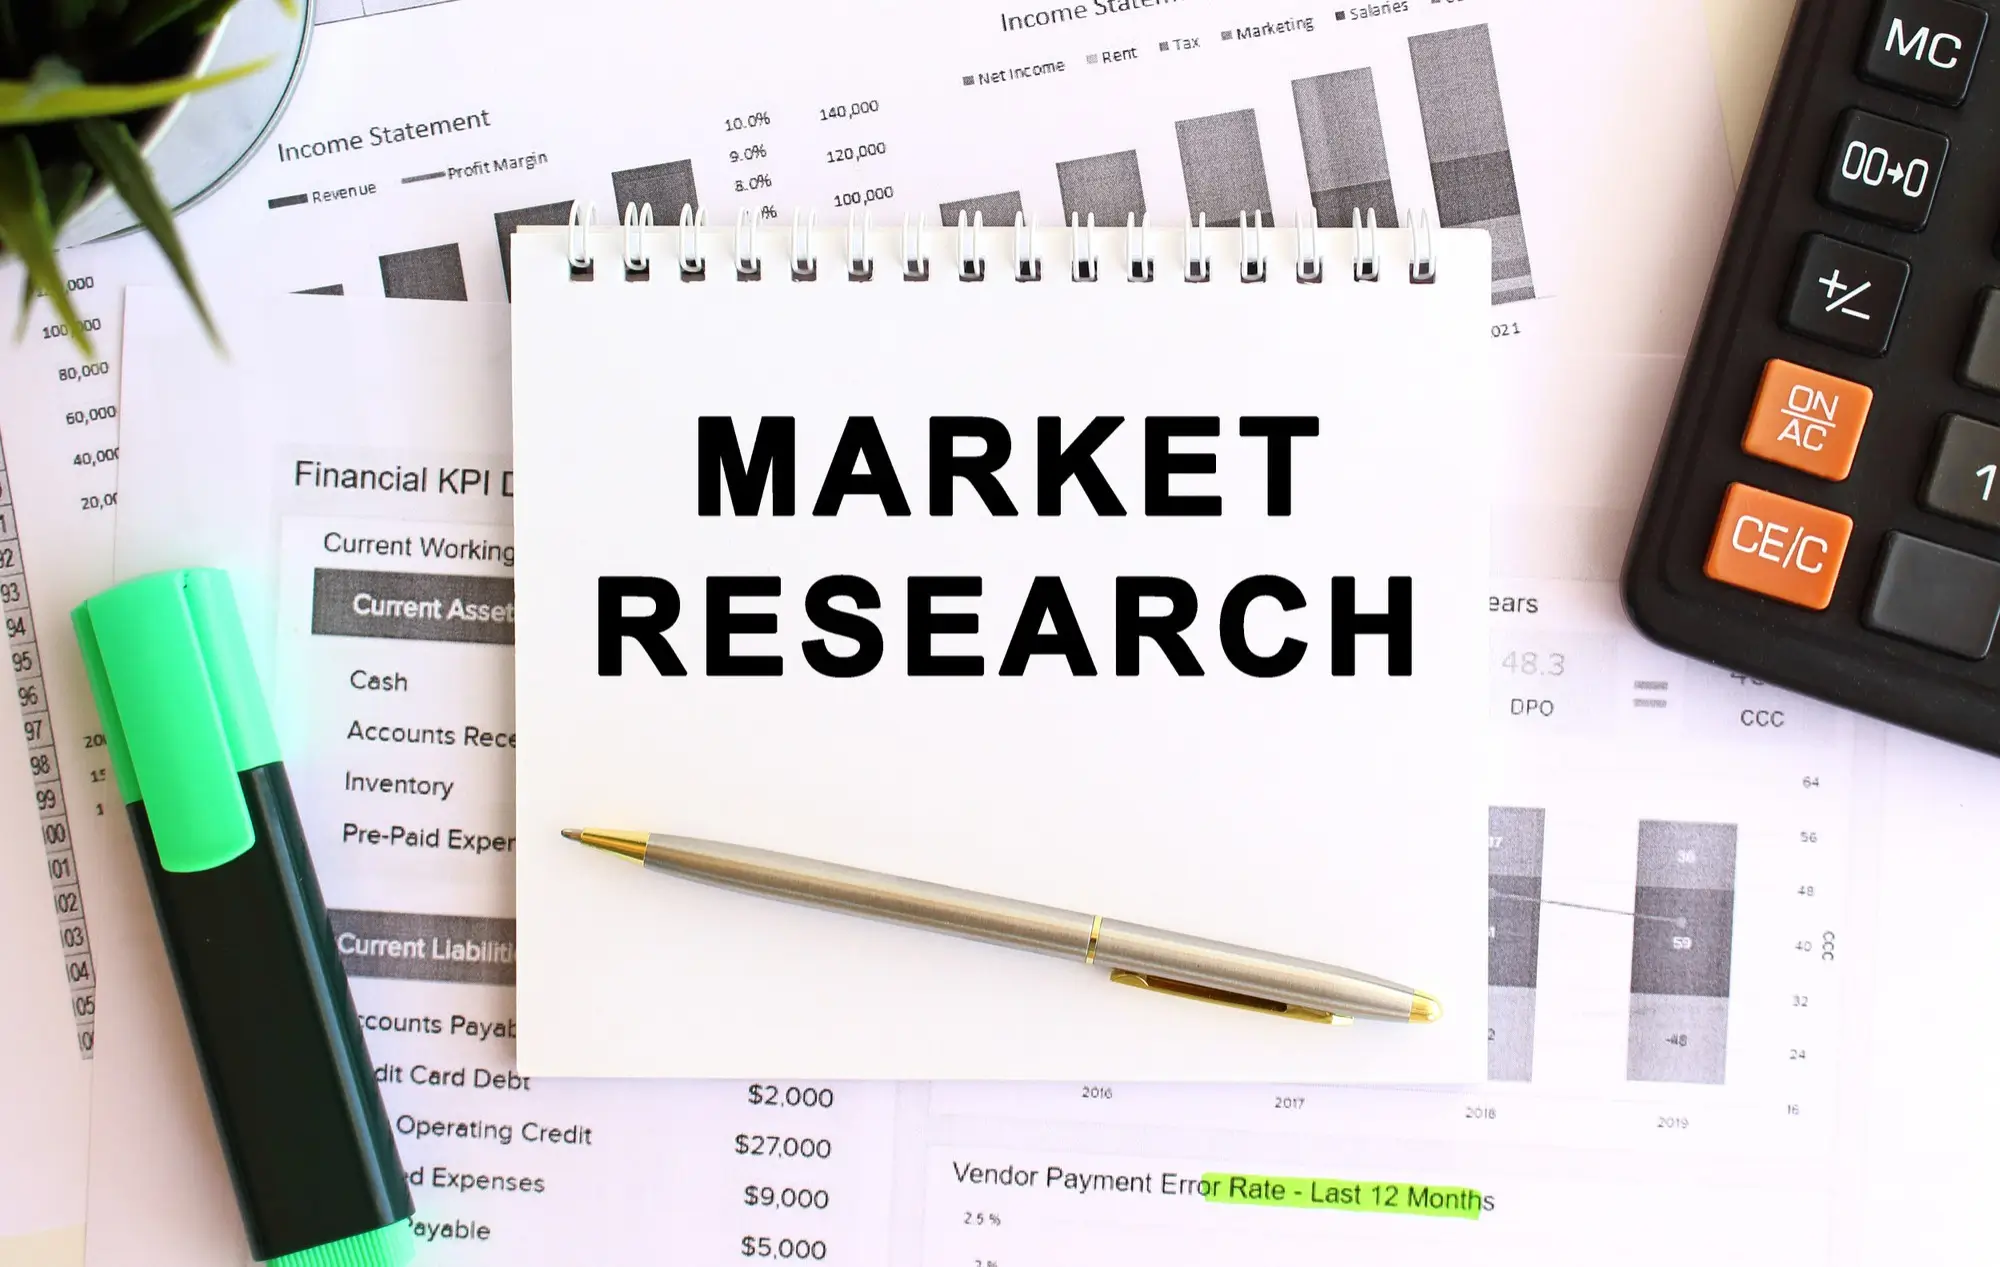 market research image